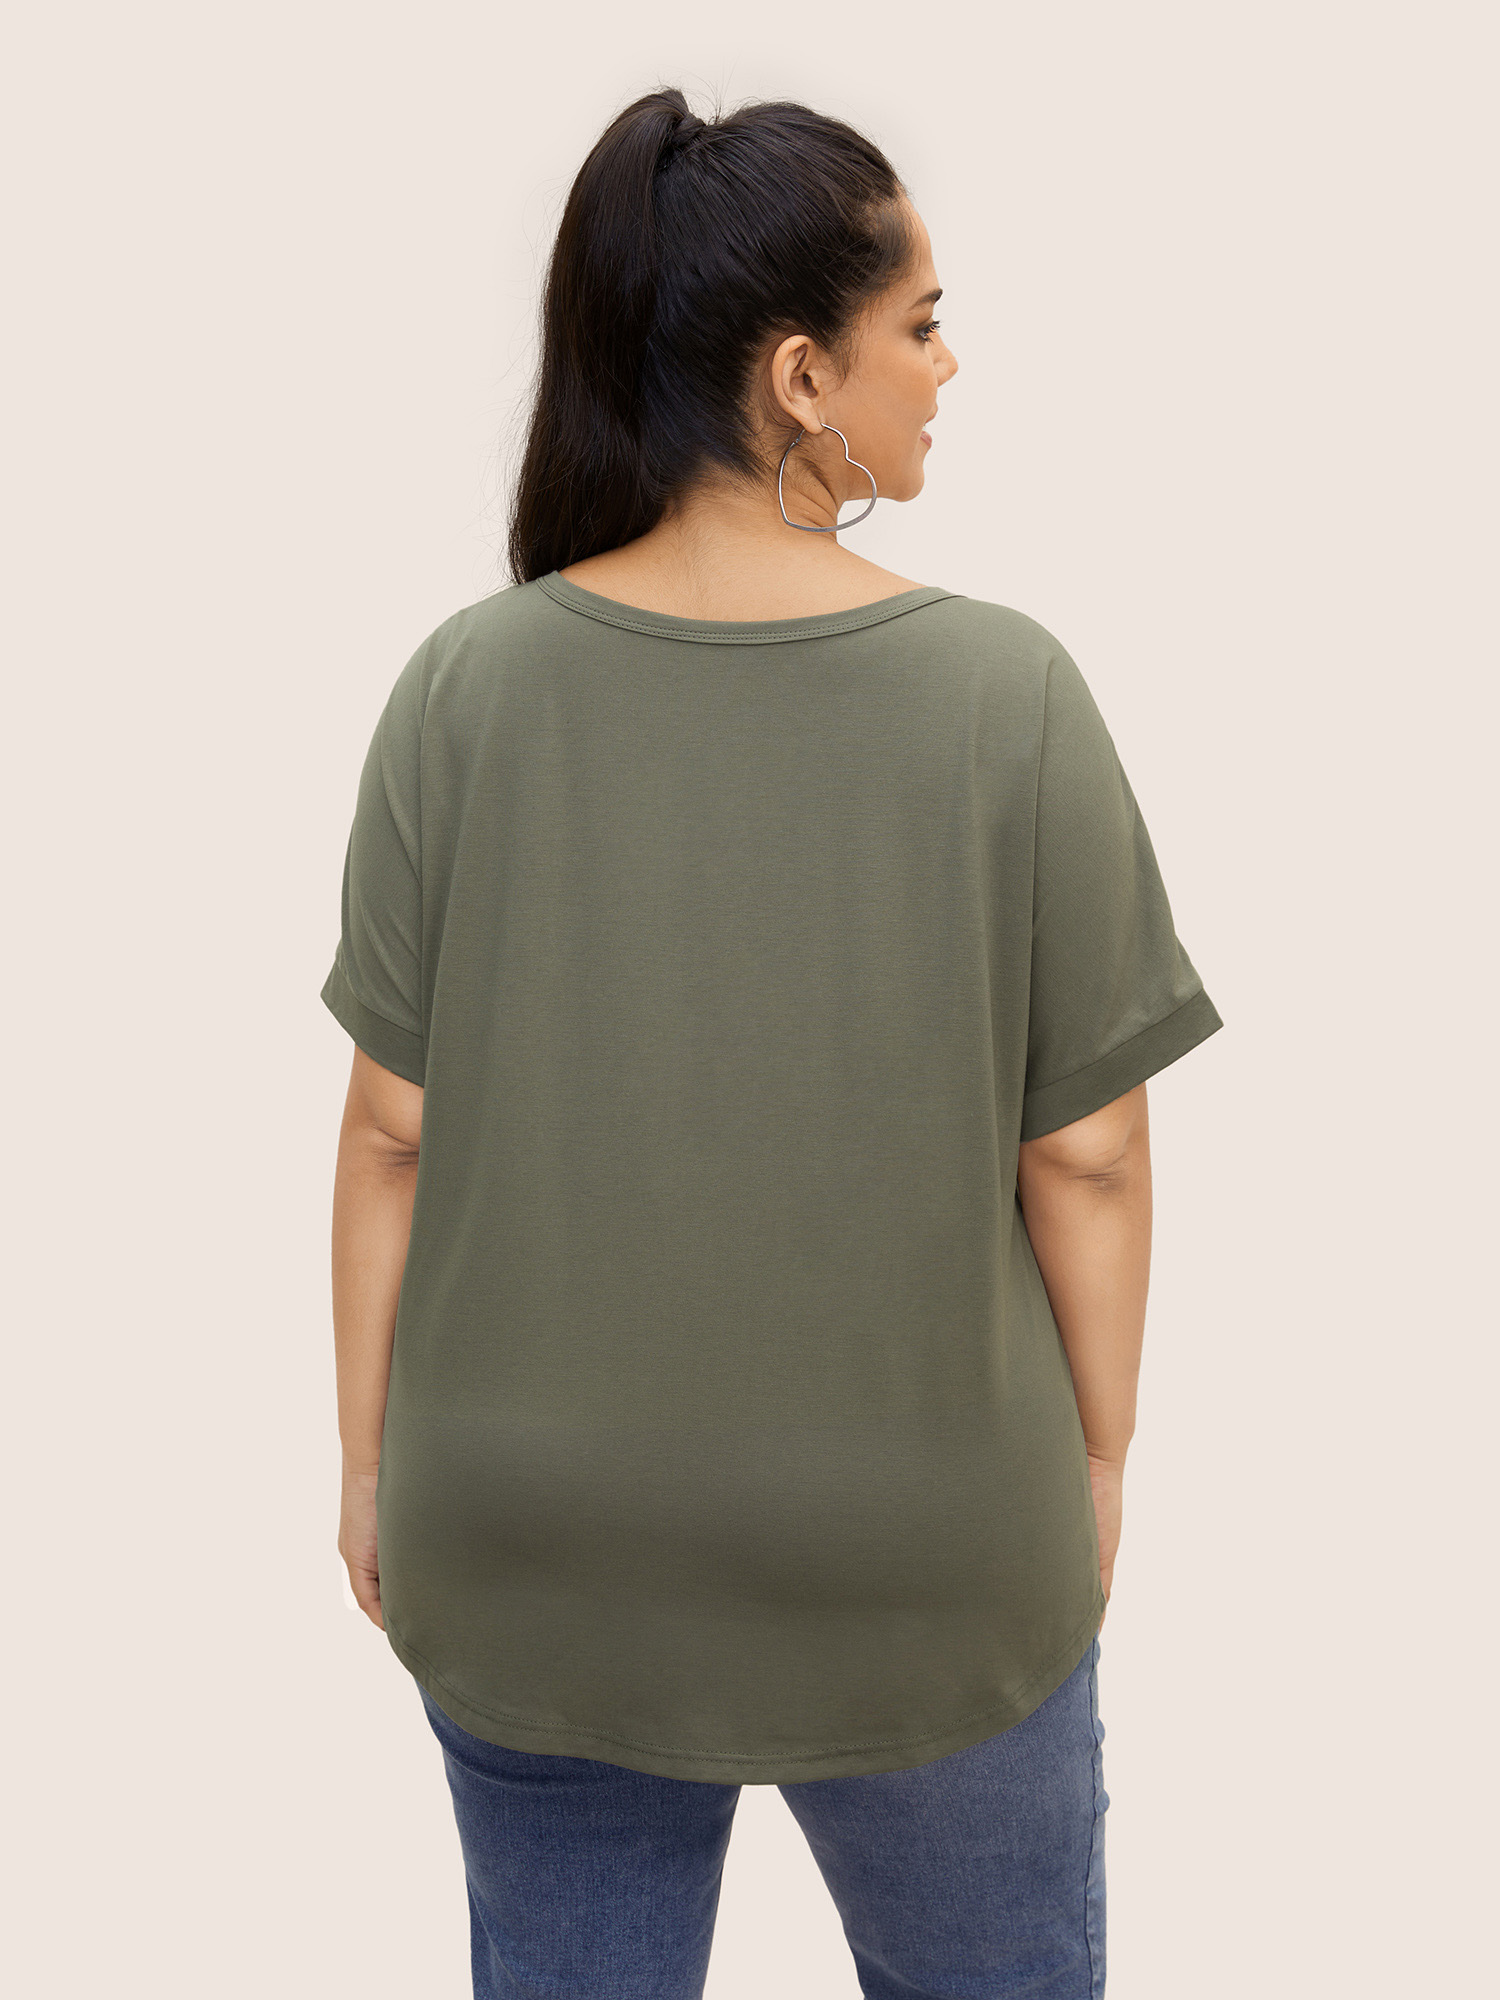 

Plus Size Letter Print Dolman Sleeve Curved Hem T-shirt ArmyGreen Women Casual Contrast Round Neck Everyday T-shirts BloomChic